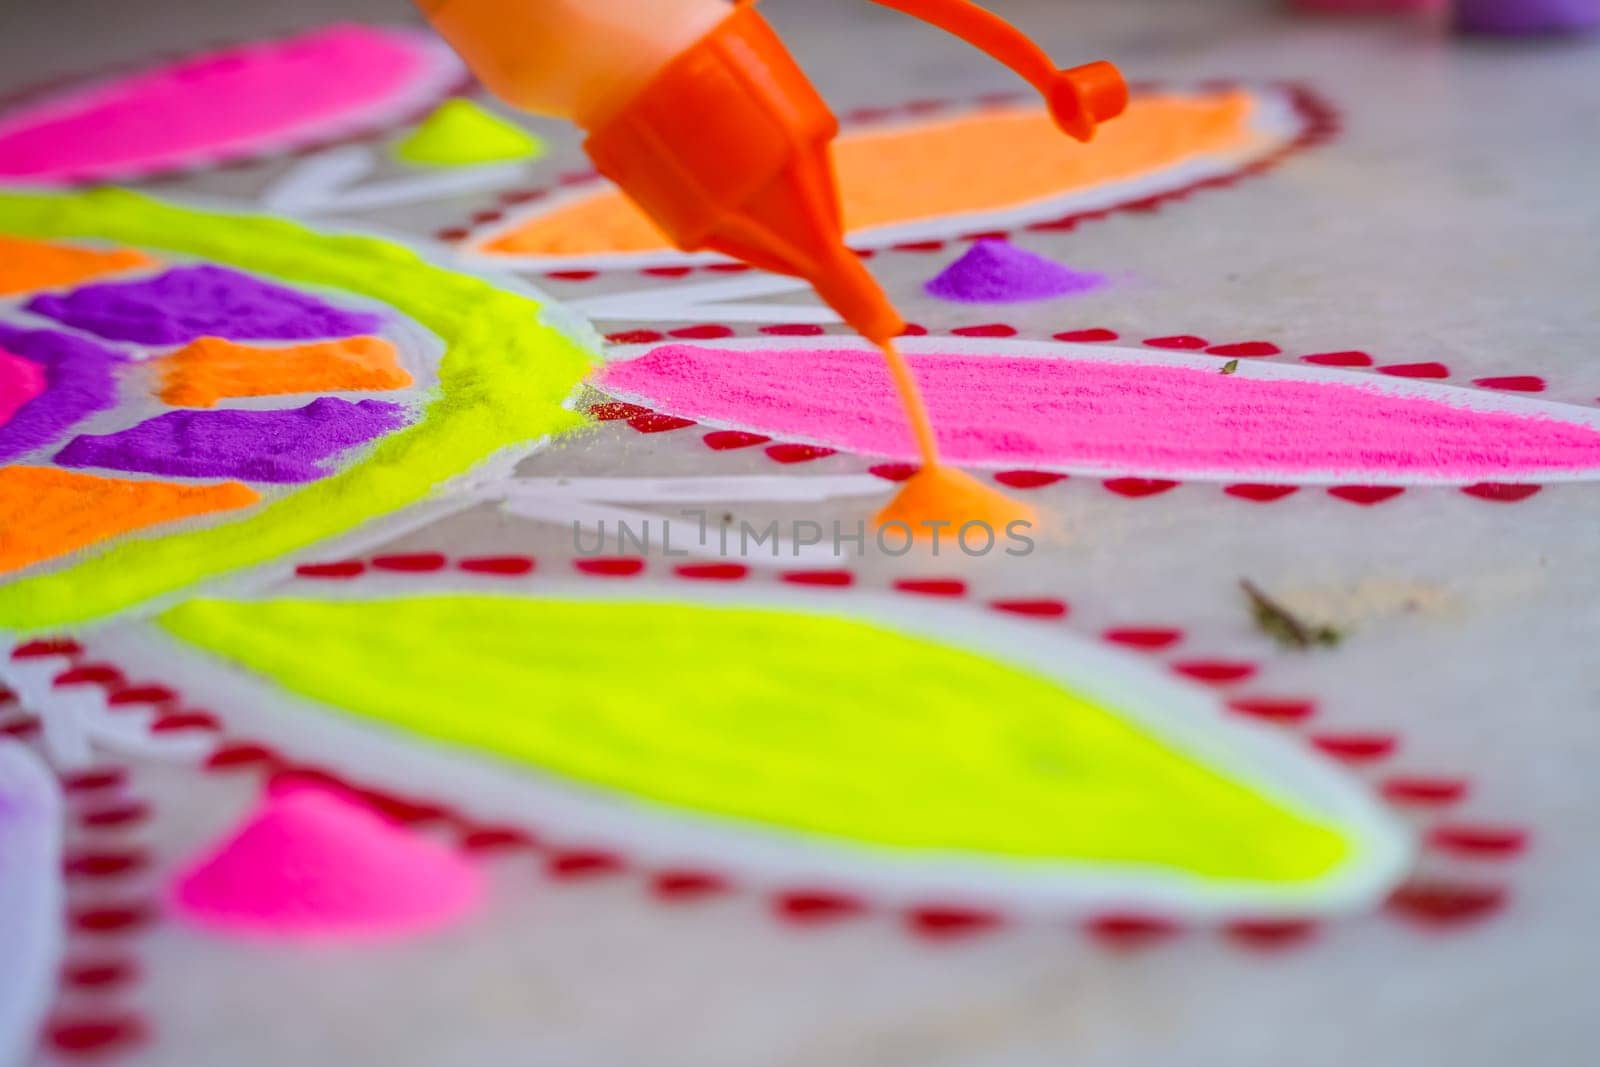 Woman using a bottle of pour a mound of orange color onto the ground to make a colorful rangoli a traditional art made on floors during festivals of diwali, dussera, onam in hindu culture